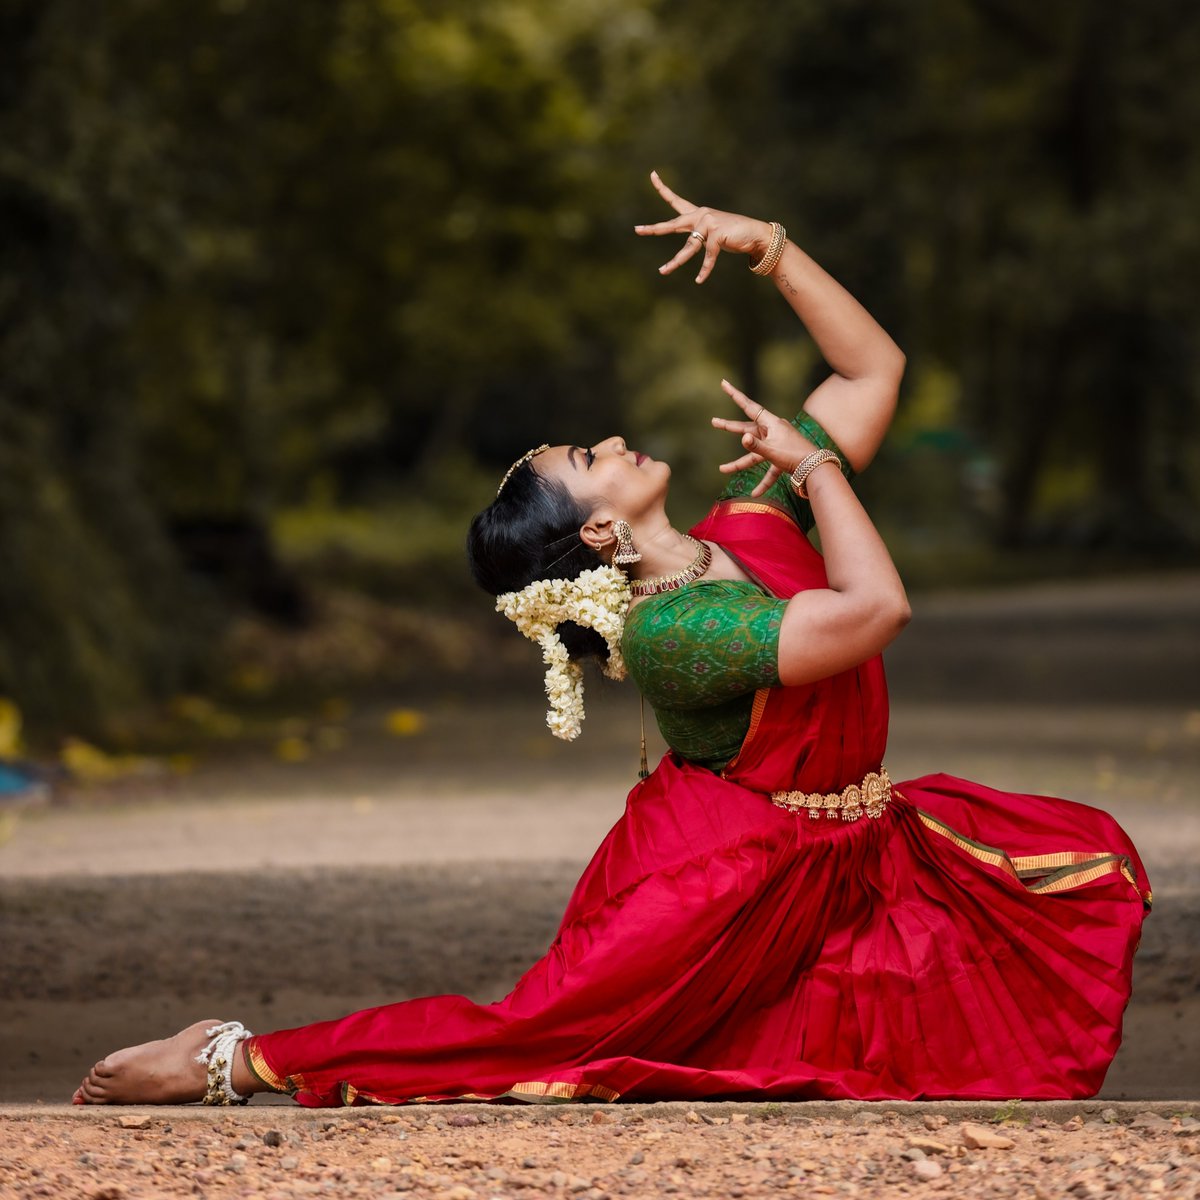 Join us on 3 November as we mark a special milestone - 30 years of Kala Sangam! We'll celebrate with an evening of stunning dance and music curated by @vijayvenkatcom and @rskdance2011.